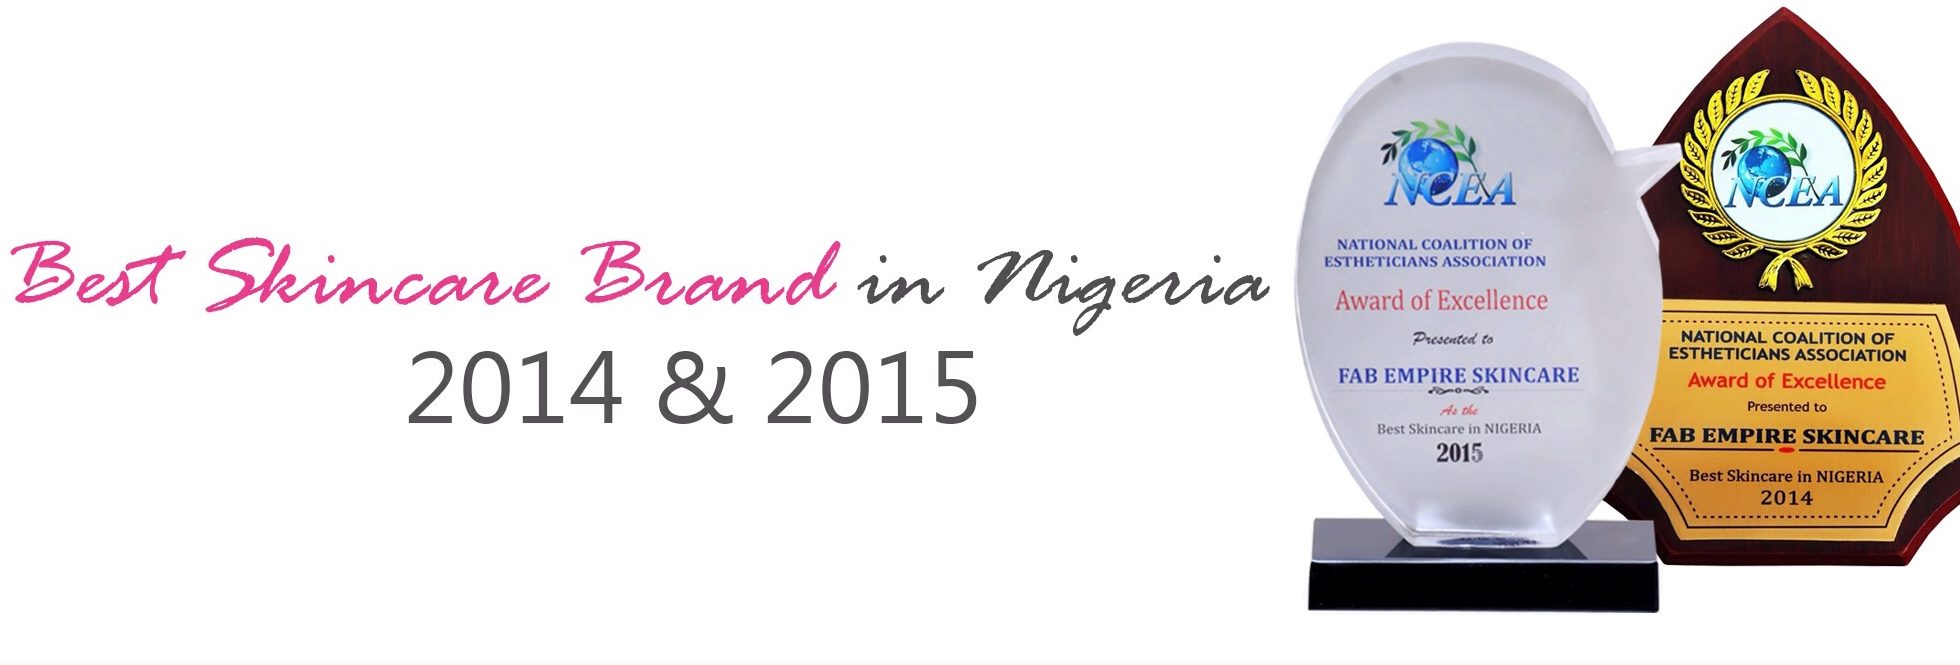 fab empire skincare was awarded best skincare brand in nigeria for the 